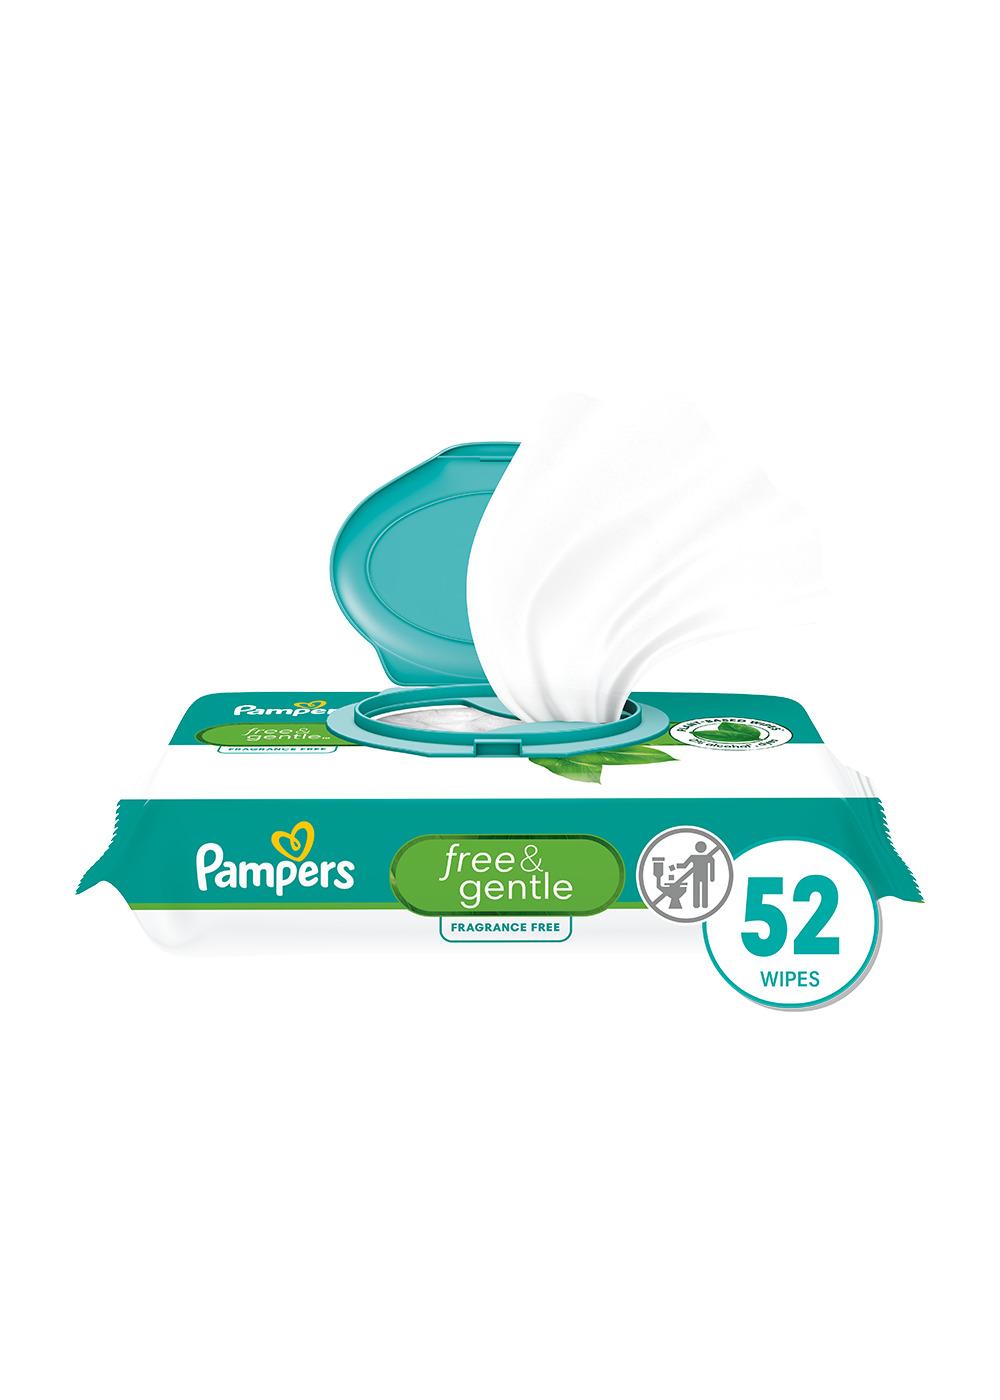 Pampers Free & Gentle Plant Based Baby Wipes; image 1 of 10